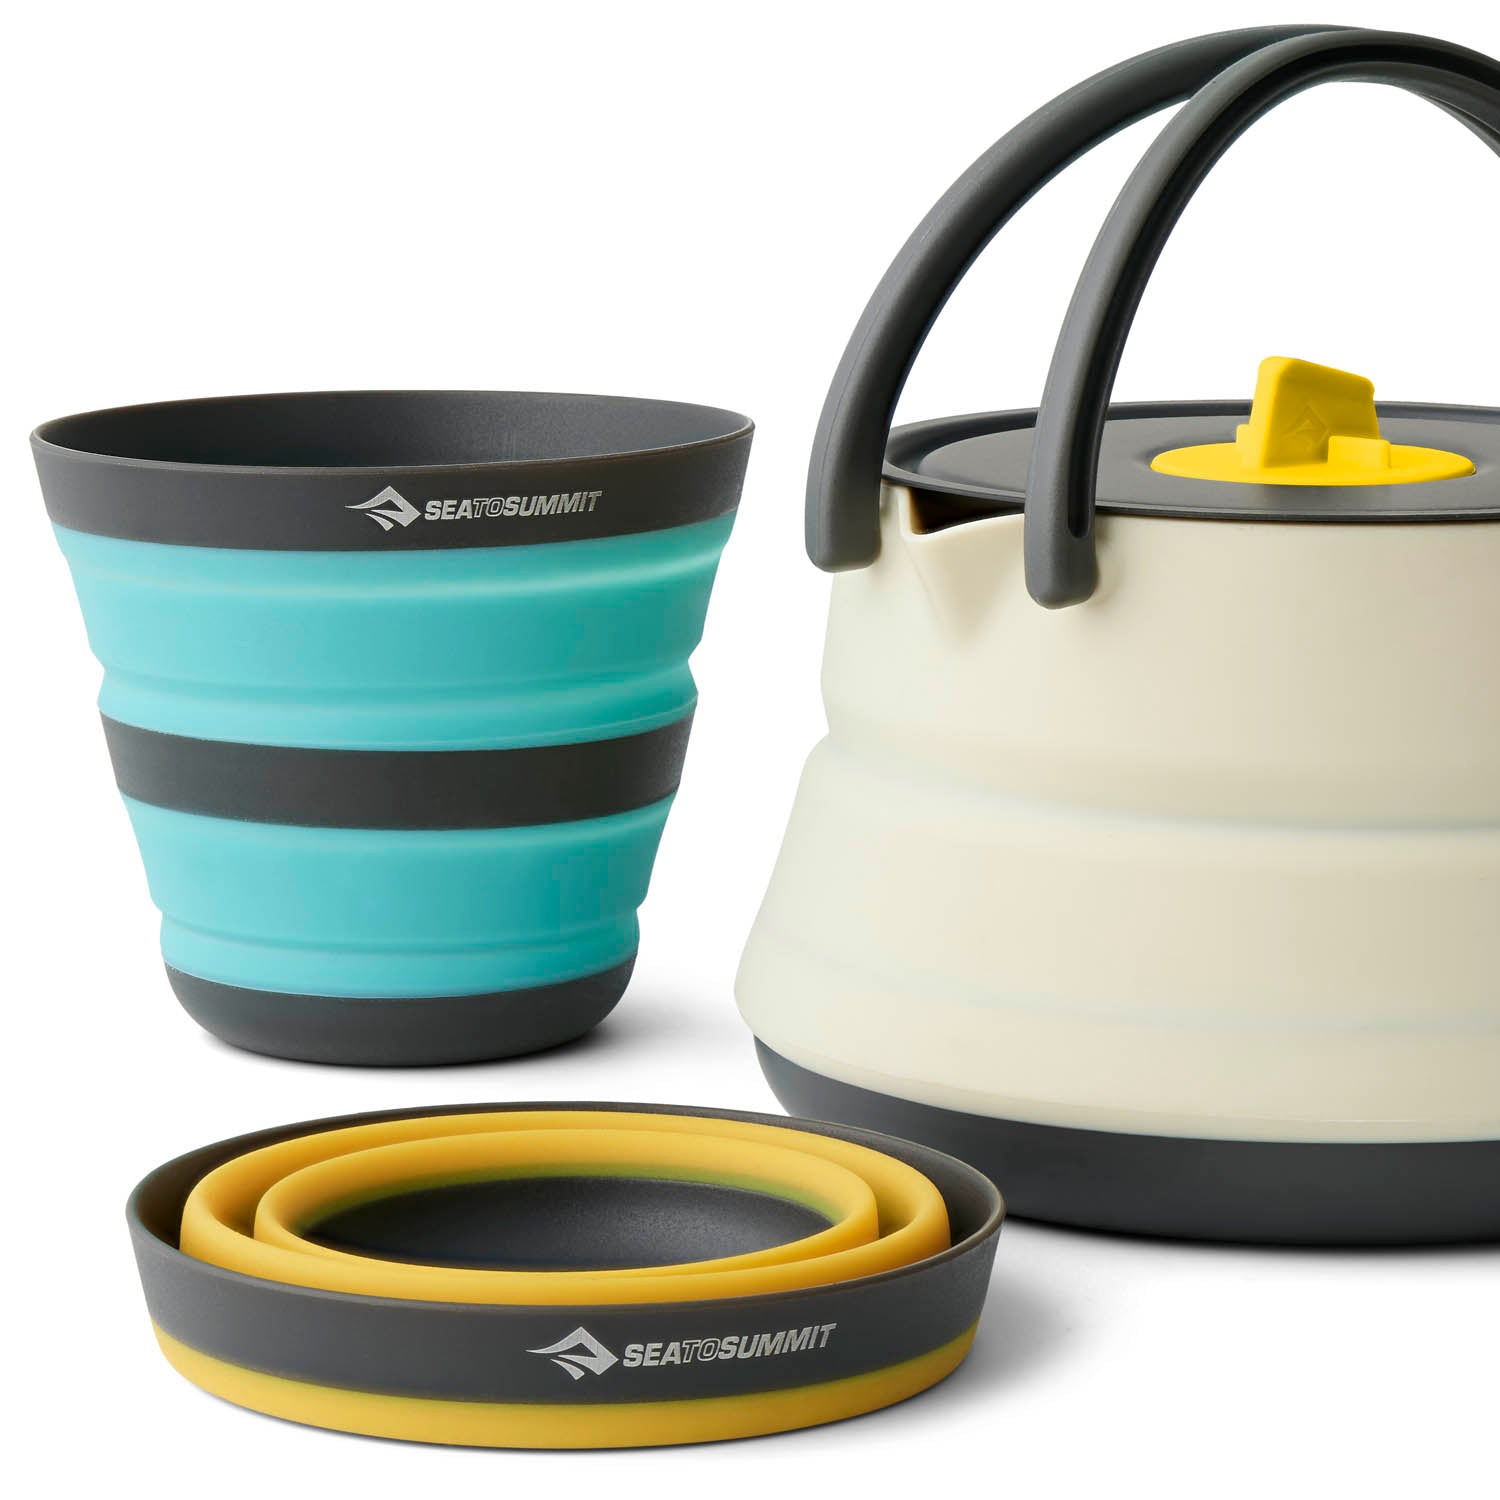 Frontier Ultralight Collapsible Kettle Cook Set - [3 Piece]